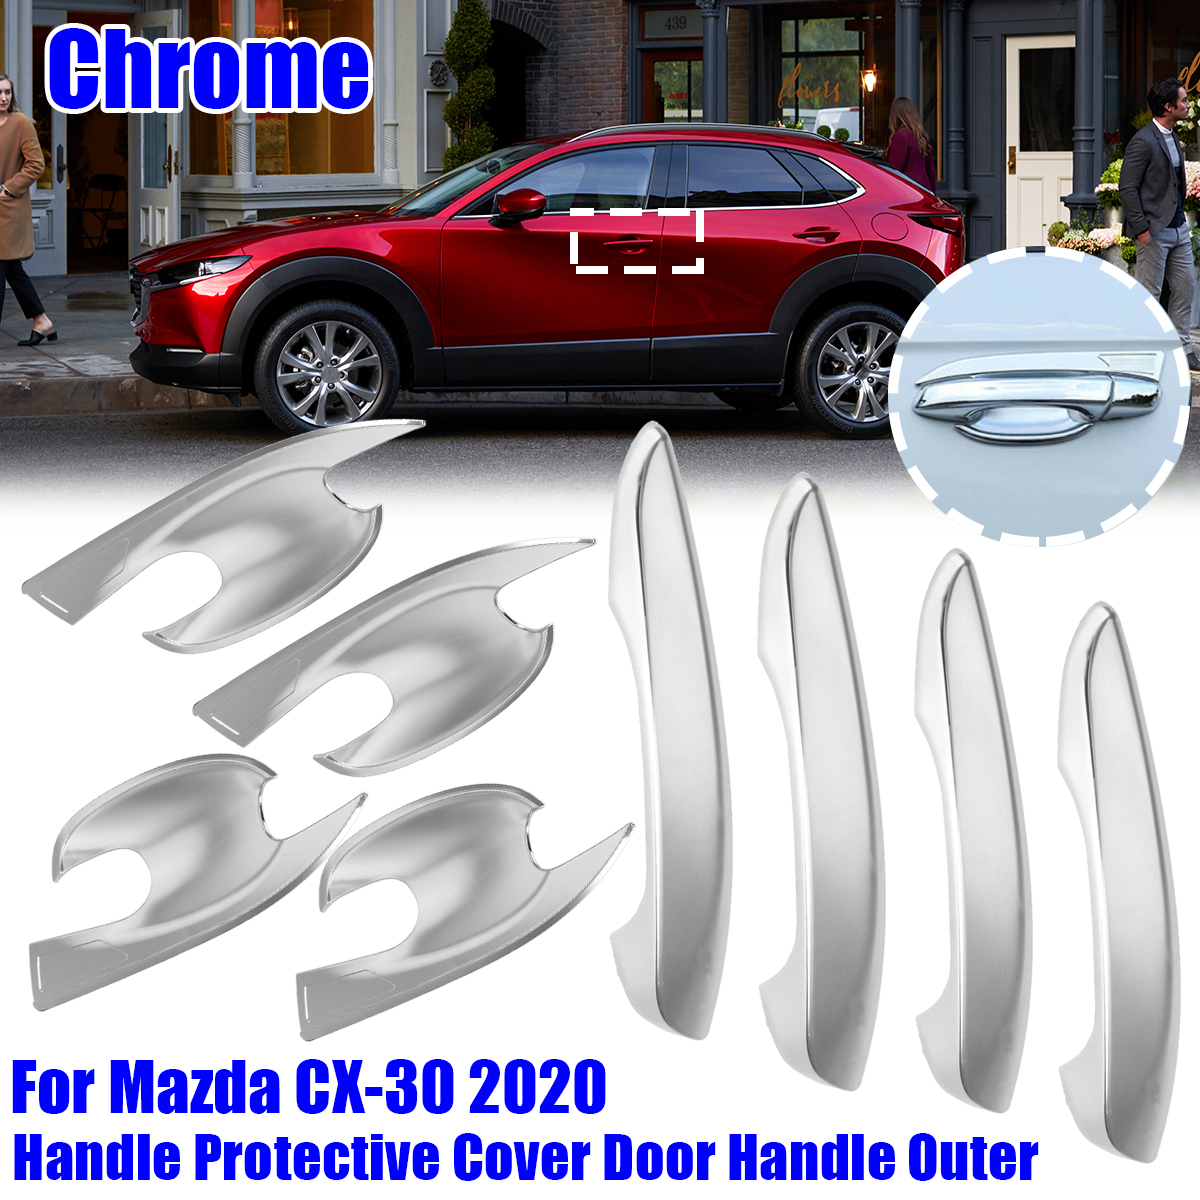 Chrome-Handle-Protective-Cover-Door-Handle-Outer-Bowls-Trim-For-Mazda-CX-30-2020-1751667-1